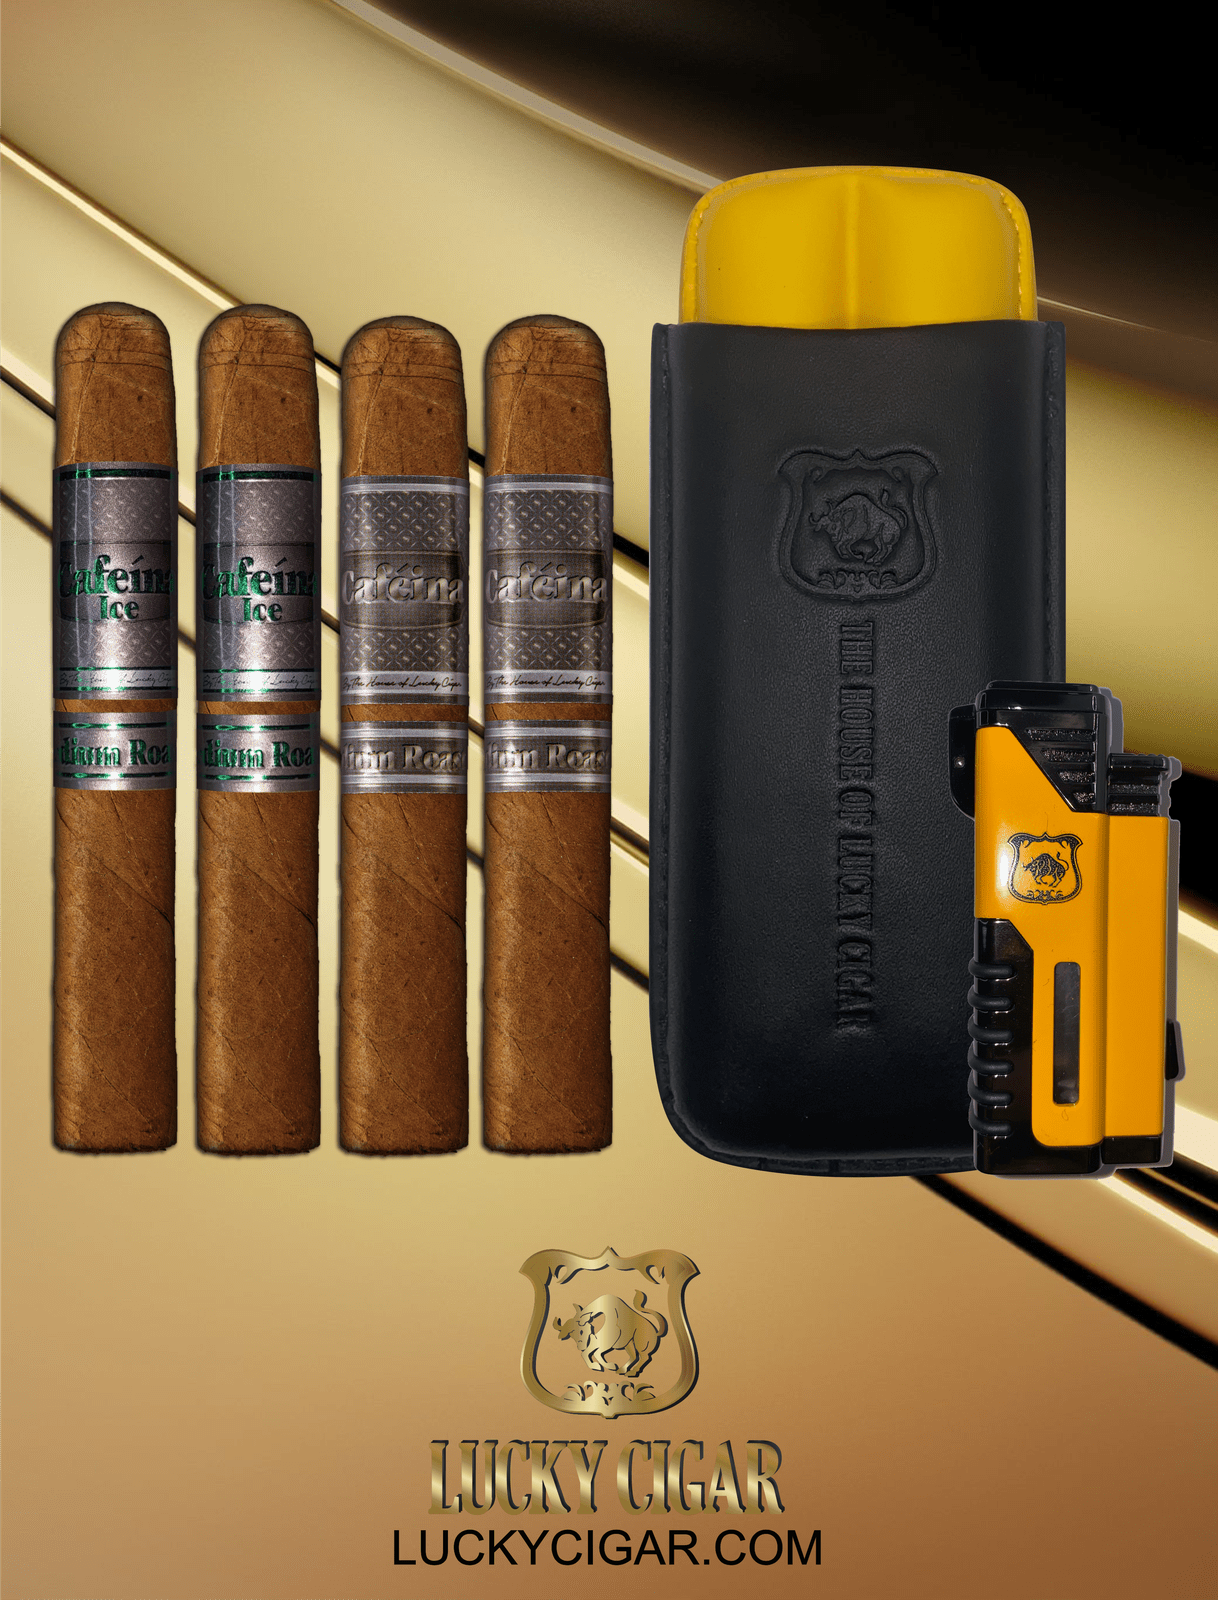 Lucky Cigar Sampler Sets: Set of 2 Cafeina Toro Cigars with Torch, Travel Humidor Case